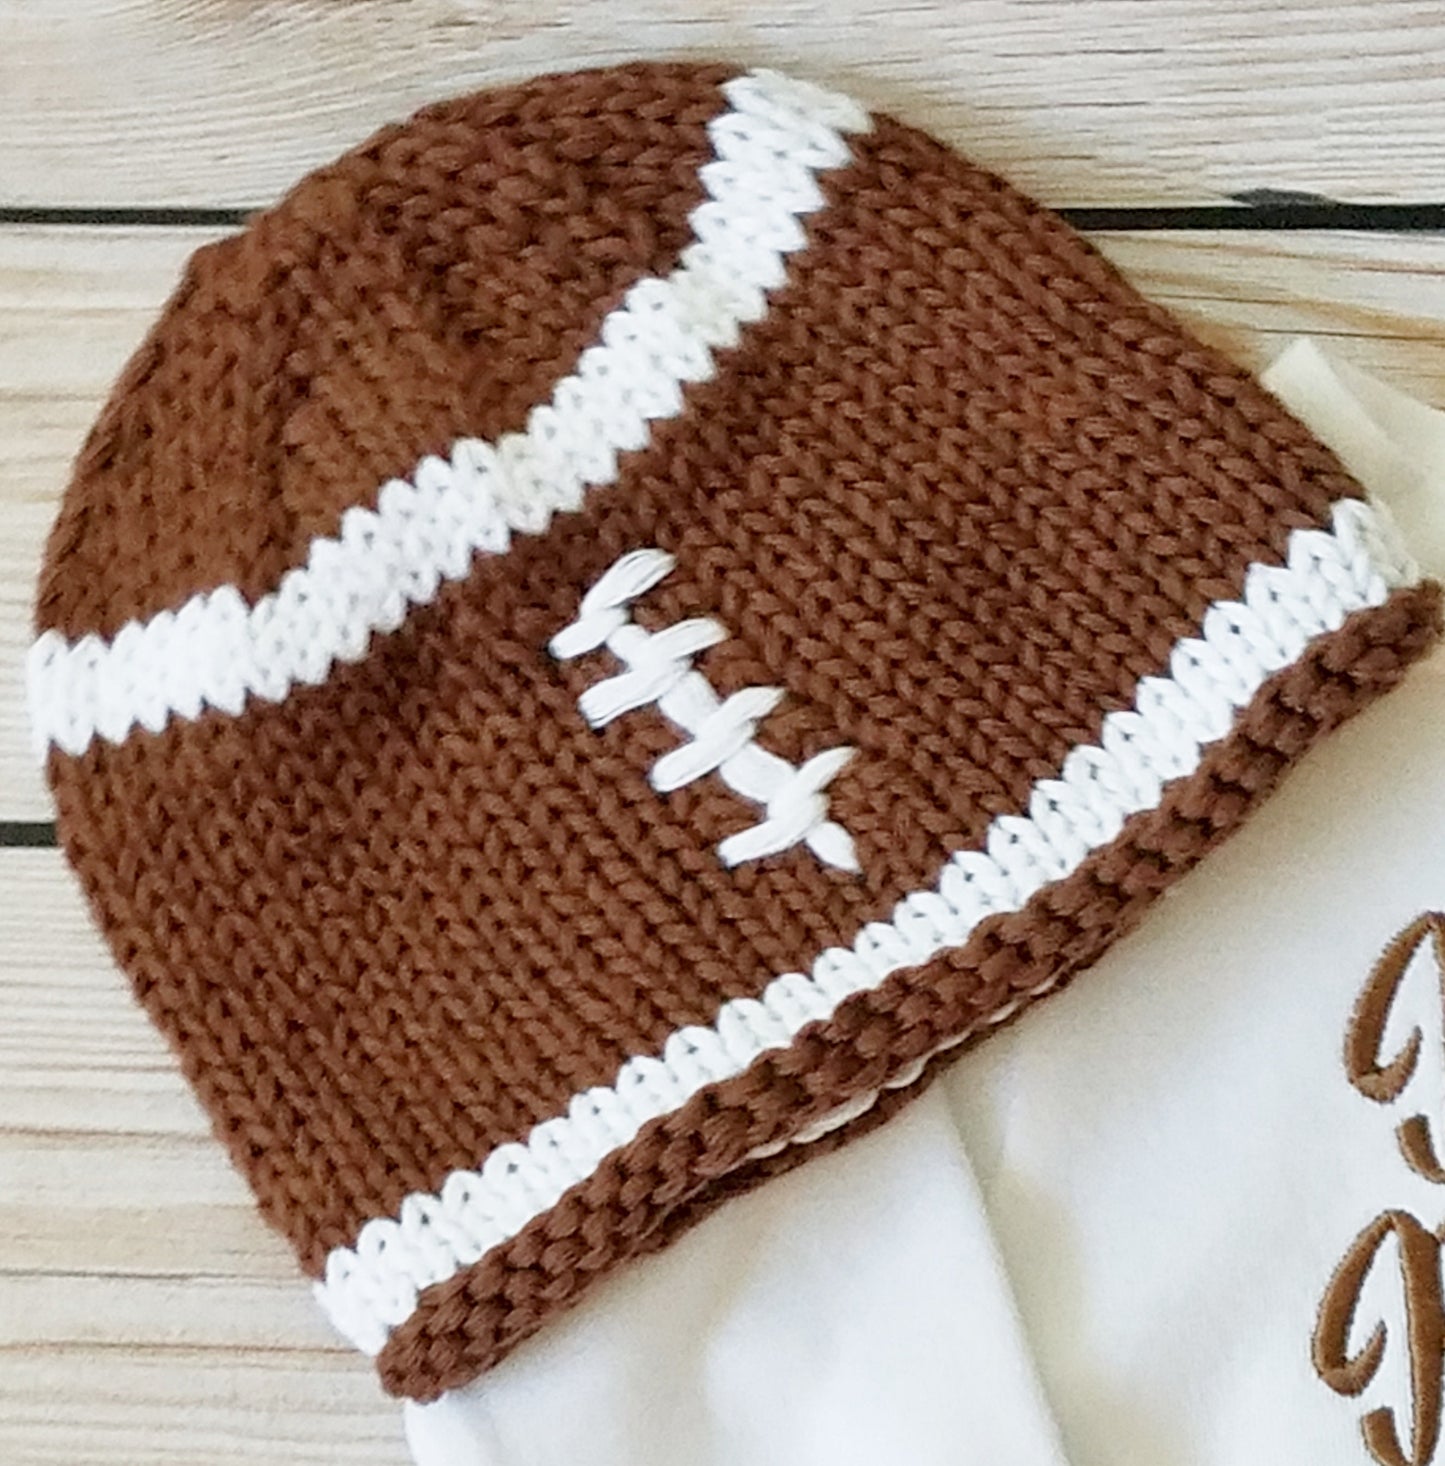 Personalized Baby Boy Football Outfit with Knit Hat